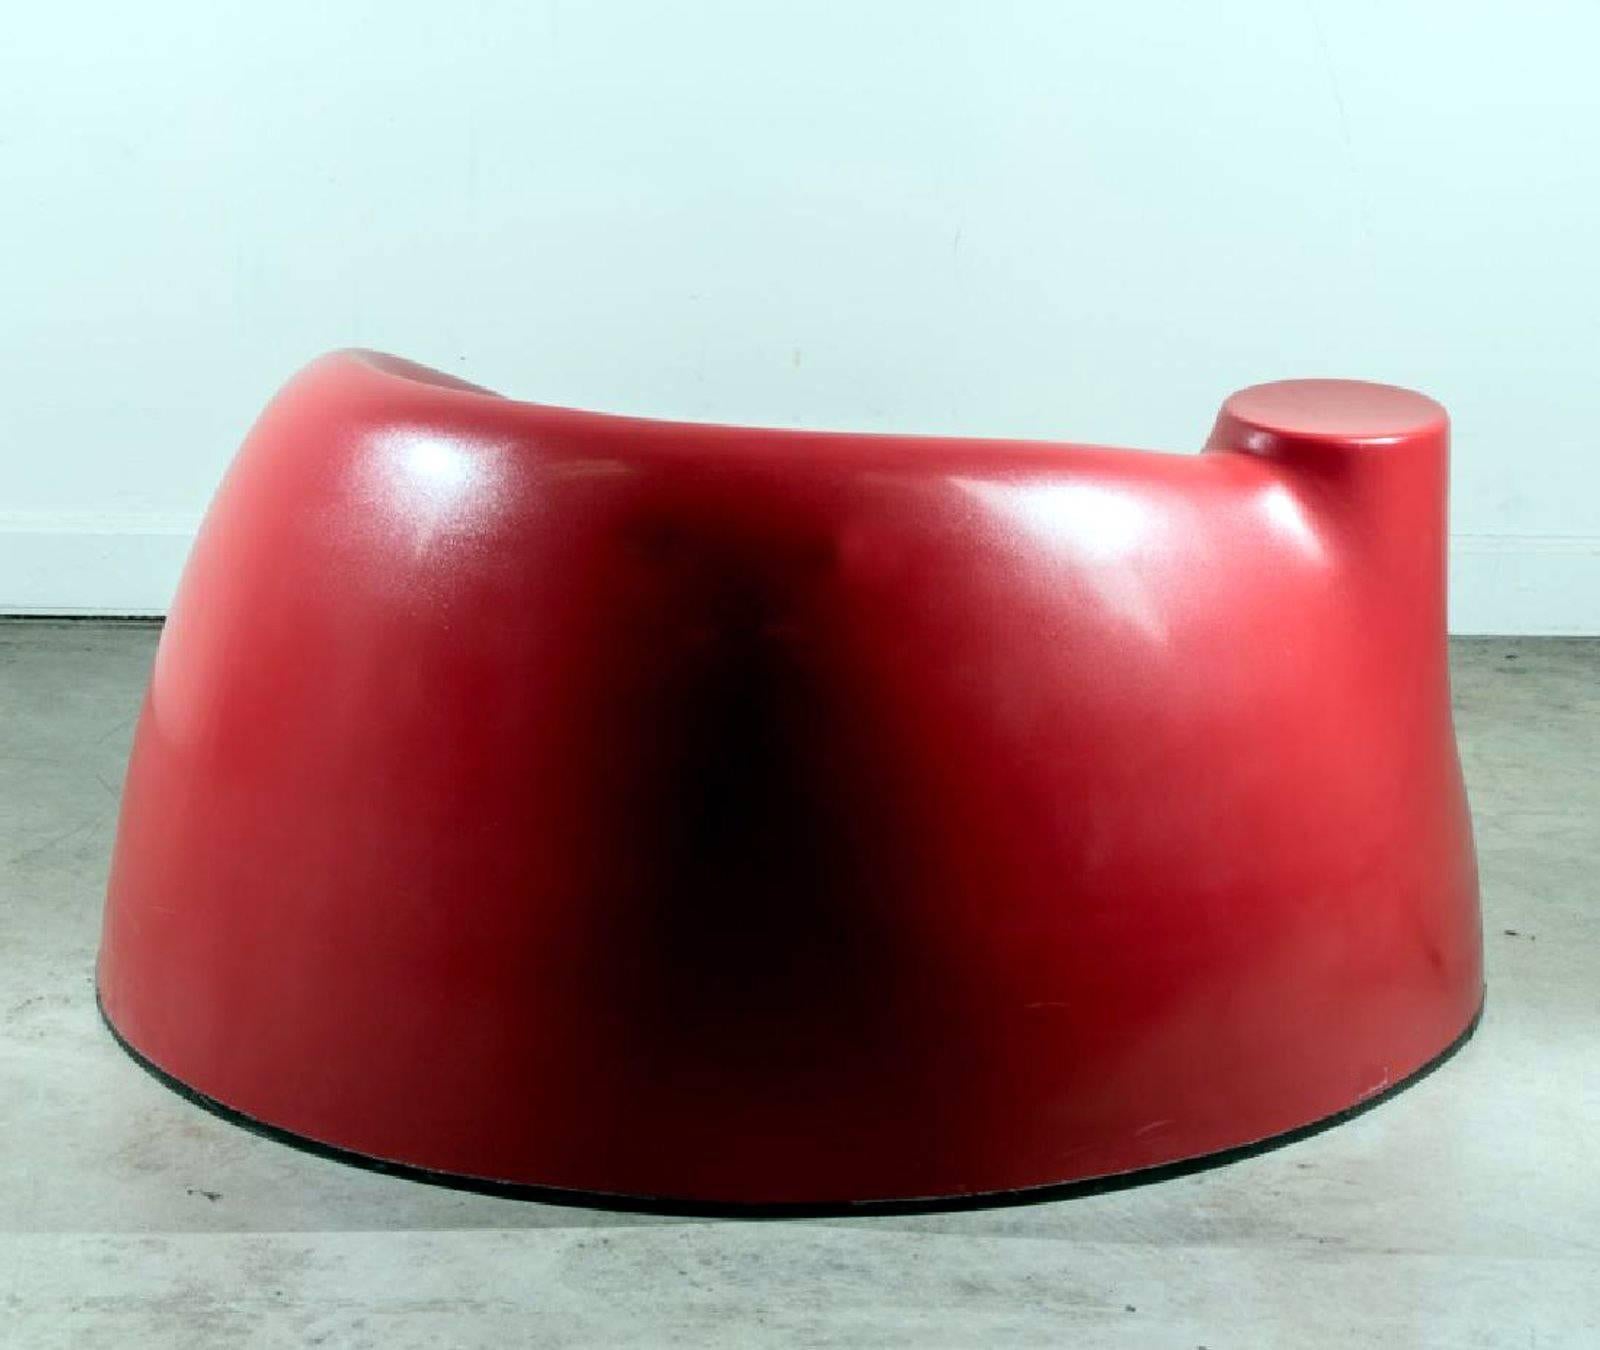 A vintage lounge chair circa 1970s. In dark red color with a cup holder platform and original rubber foot ring. The chair is a playful design after the castle chair, one of the iconic pieces in Wendell Castle's versatile repertoire that uses the